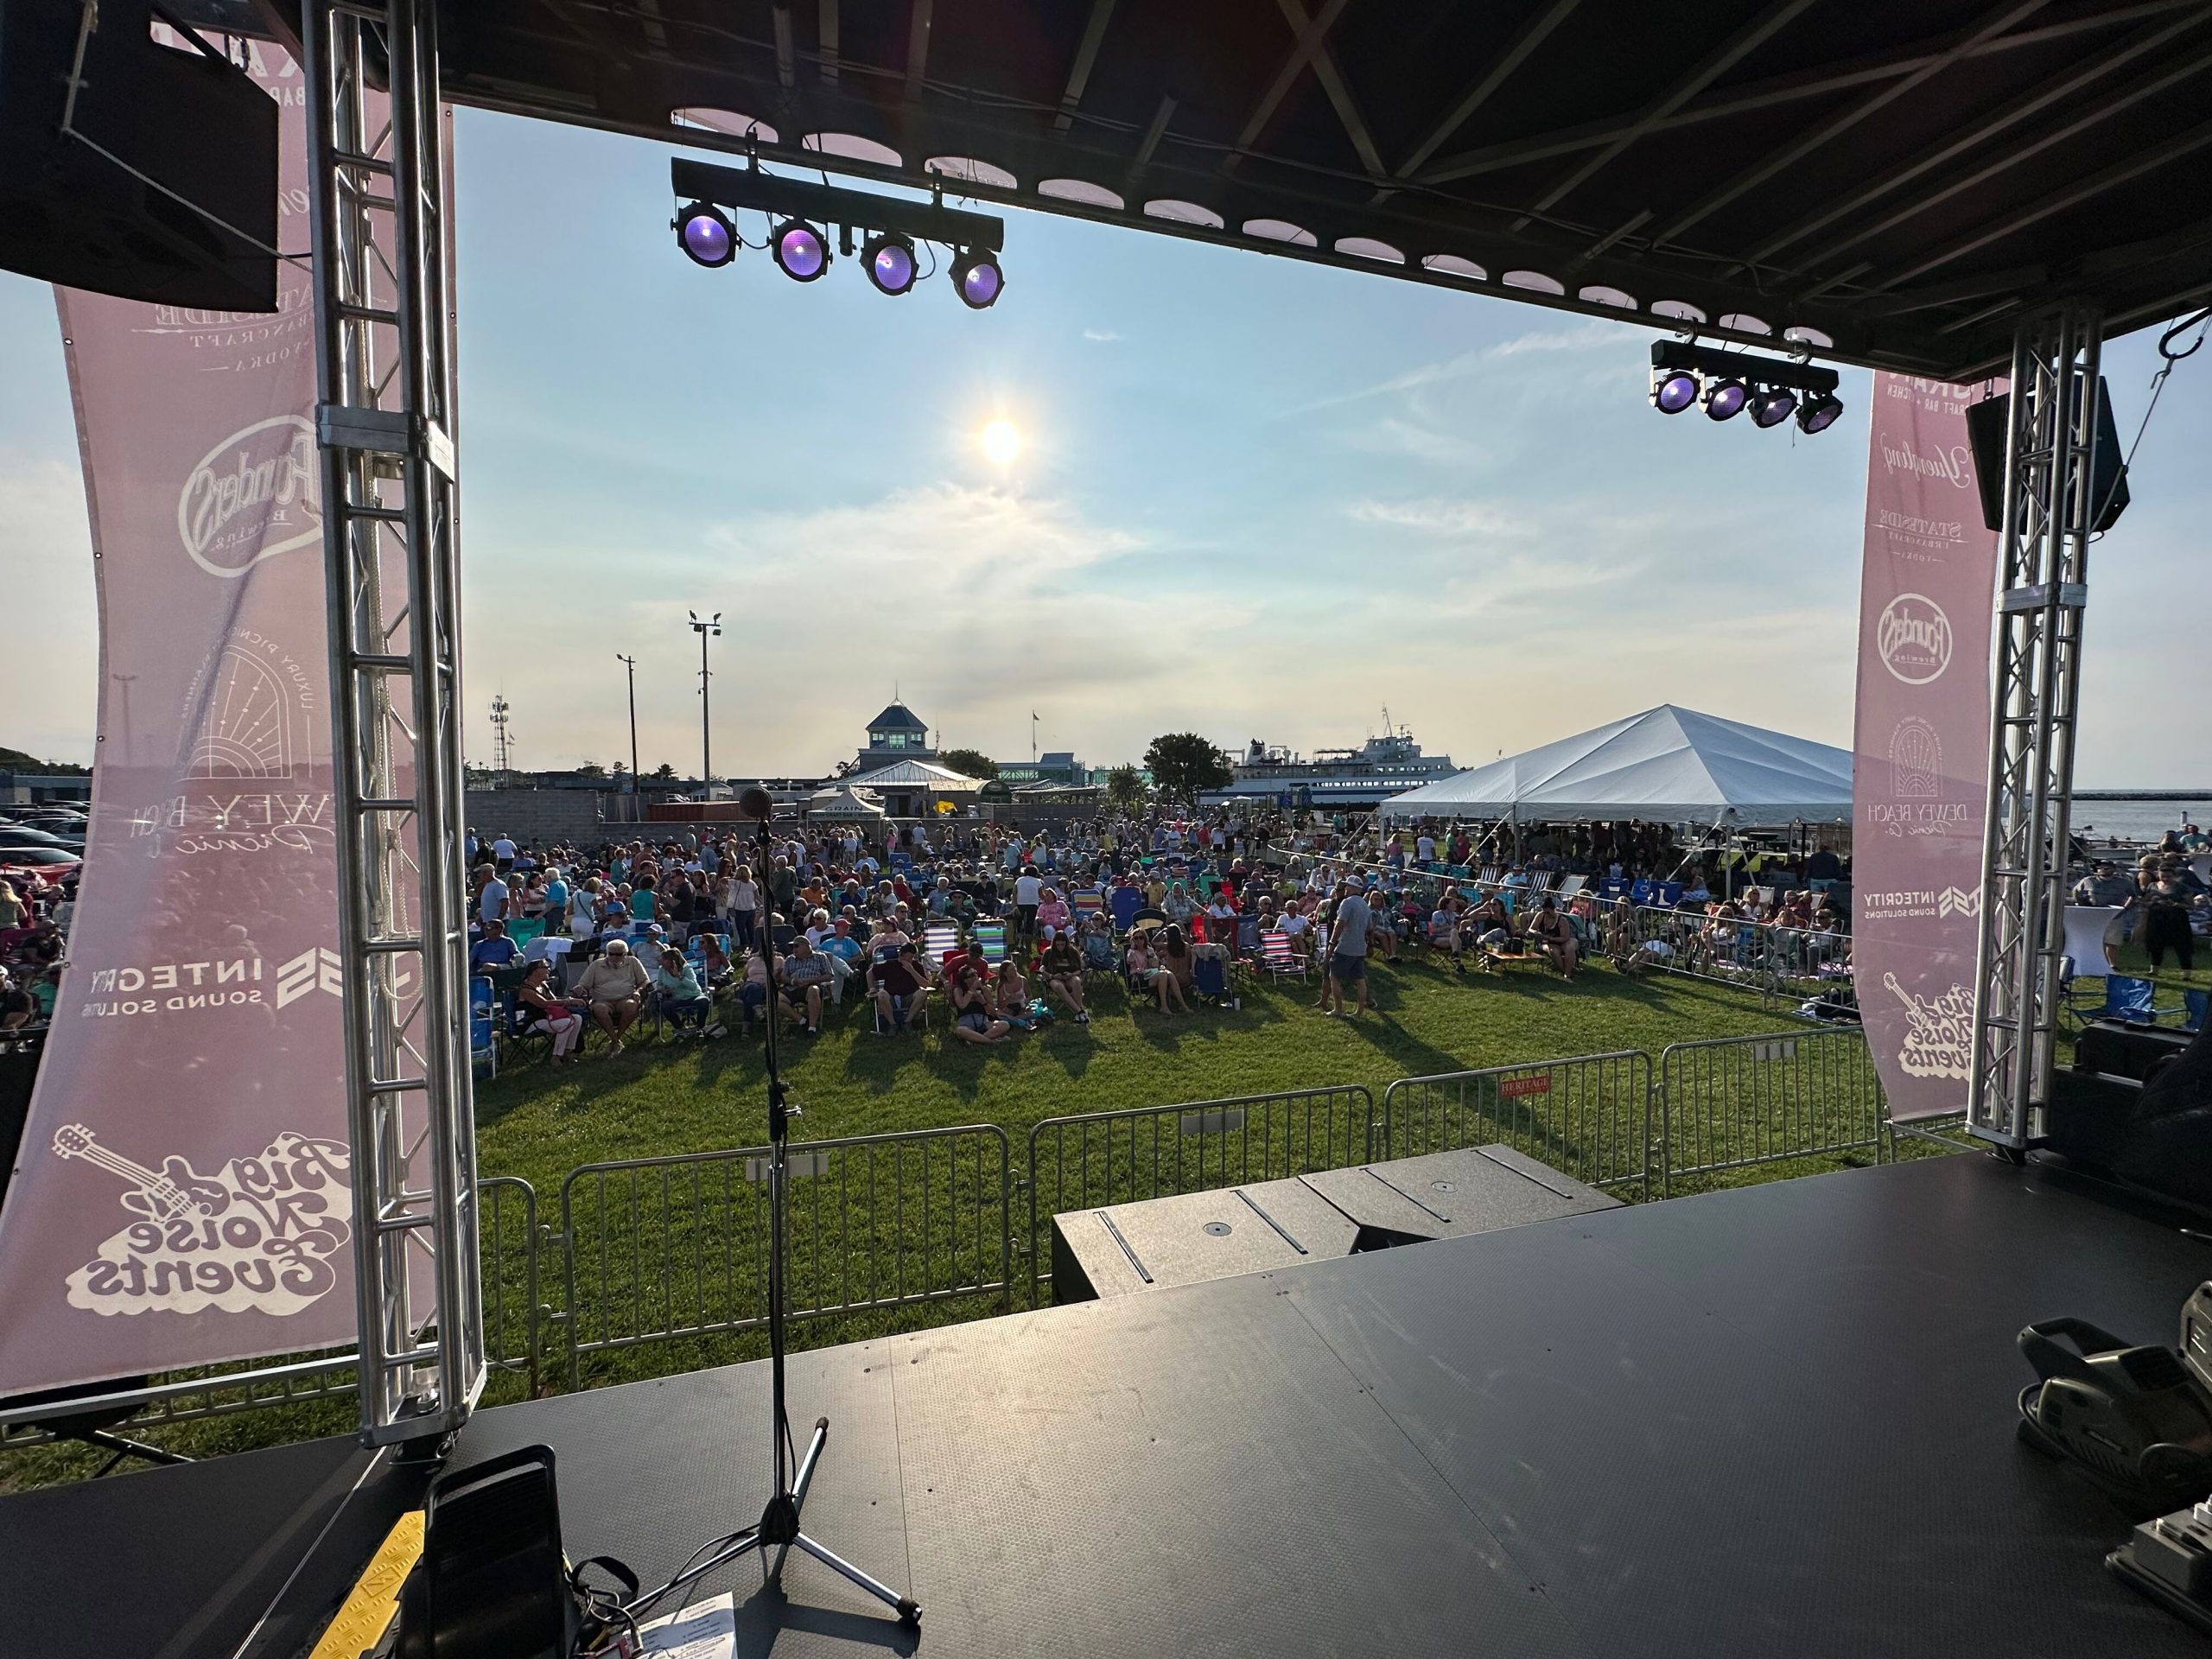 Picture taken on-stage looking out at the crowd. Integrity Sound Solutions